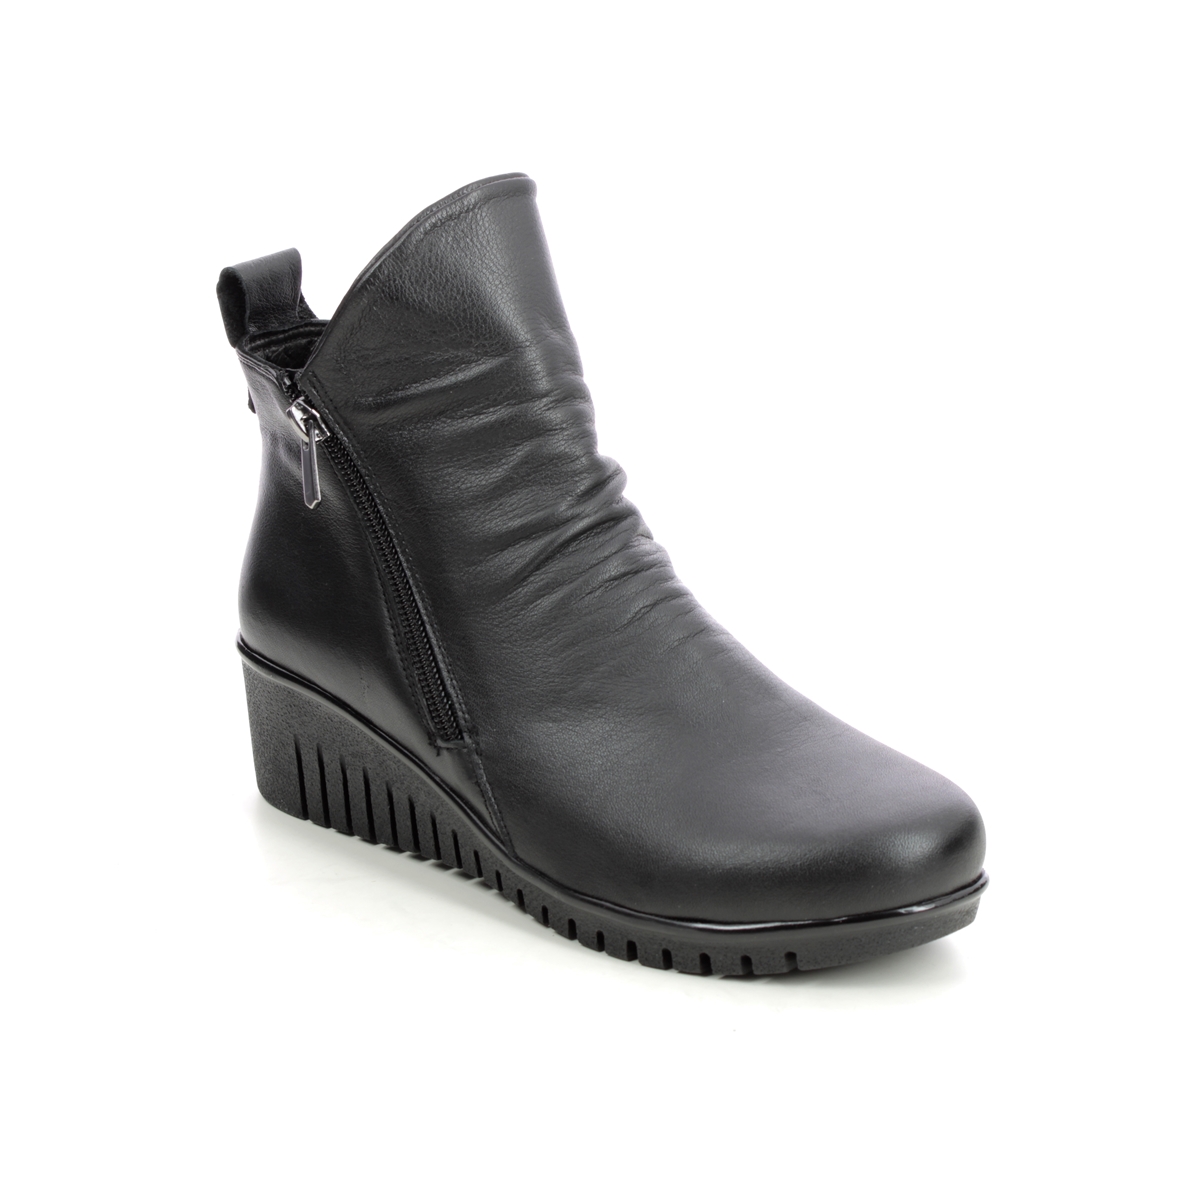 Lotus Cordelia Ceraso Black leather Womens Wedge Boots in a Plain Leather in Size 37